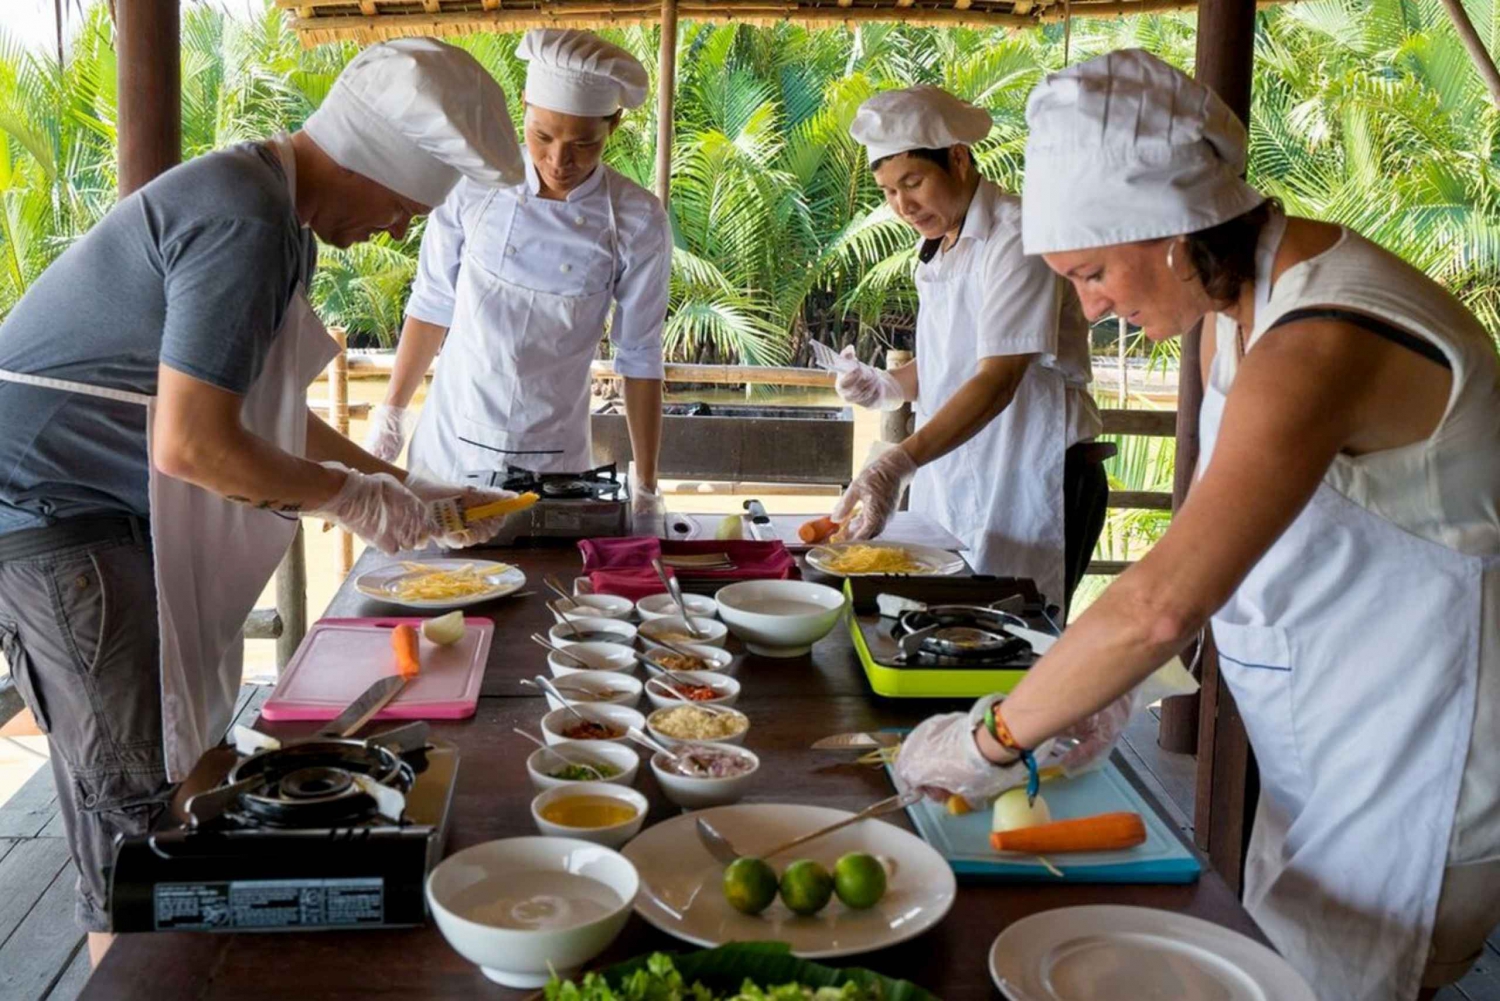 From Hoi An: Tra Que Village Tour & Cooking Experience